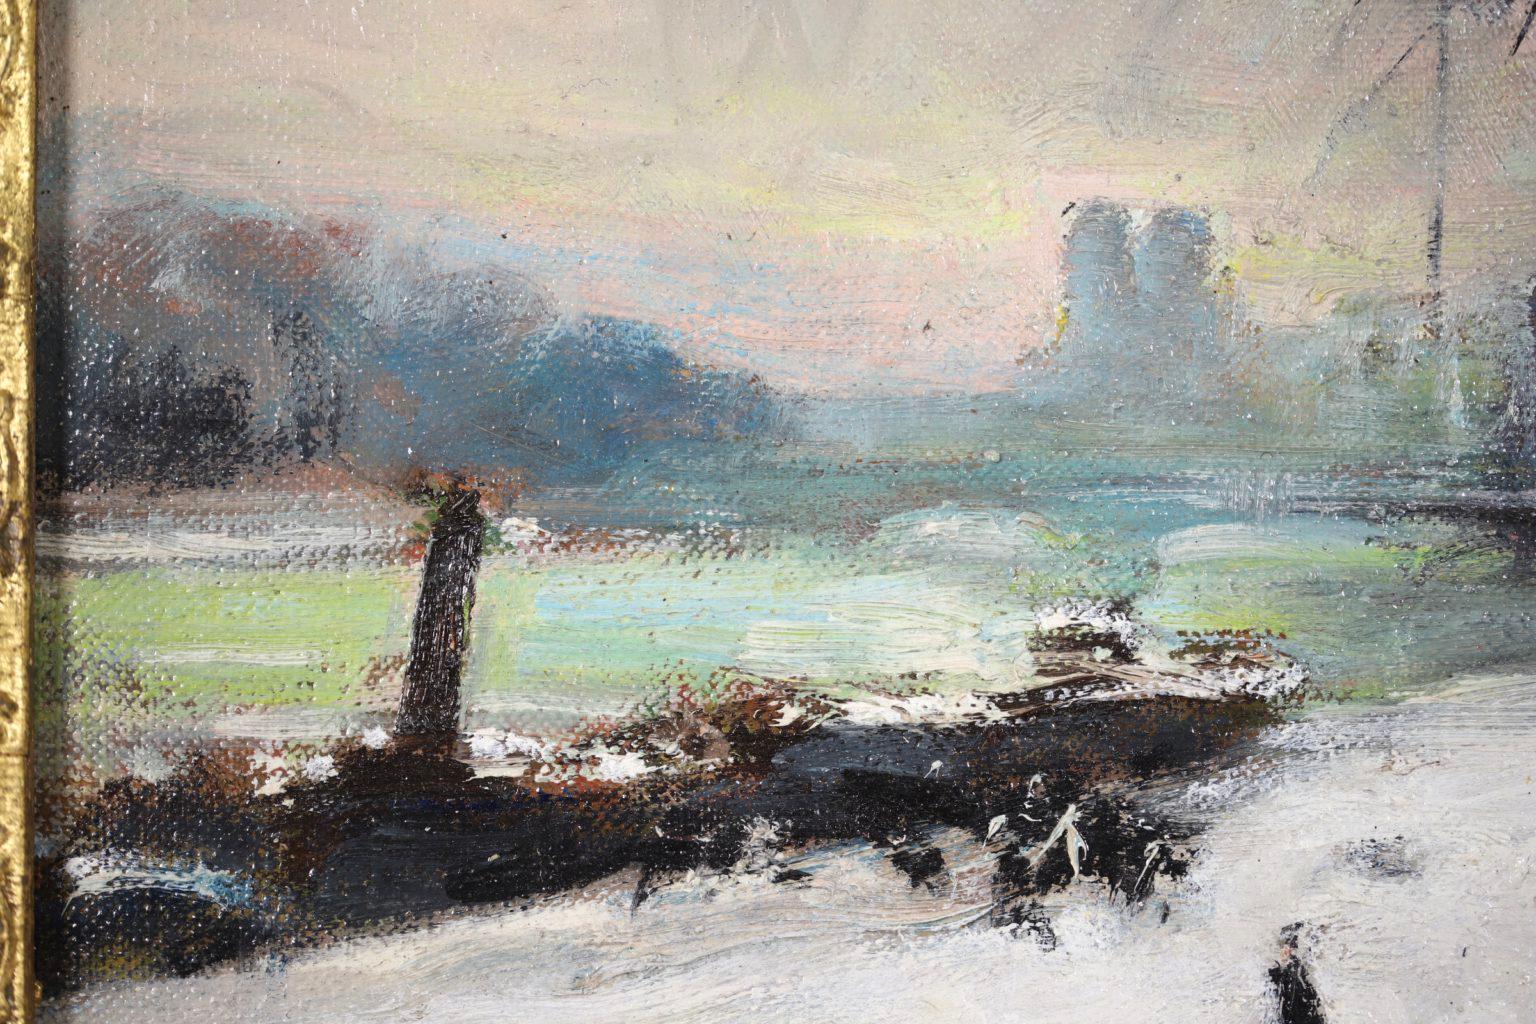 Seine in the Snow - Impressionist Oil, Figures in Riverscape by Jules Rene Herve 1